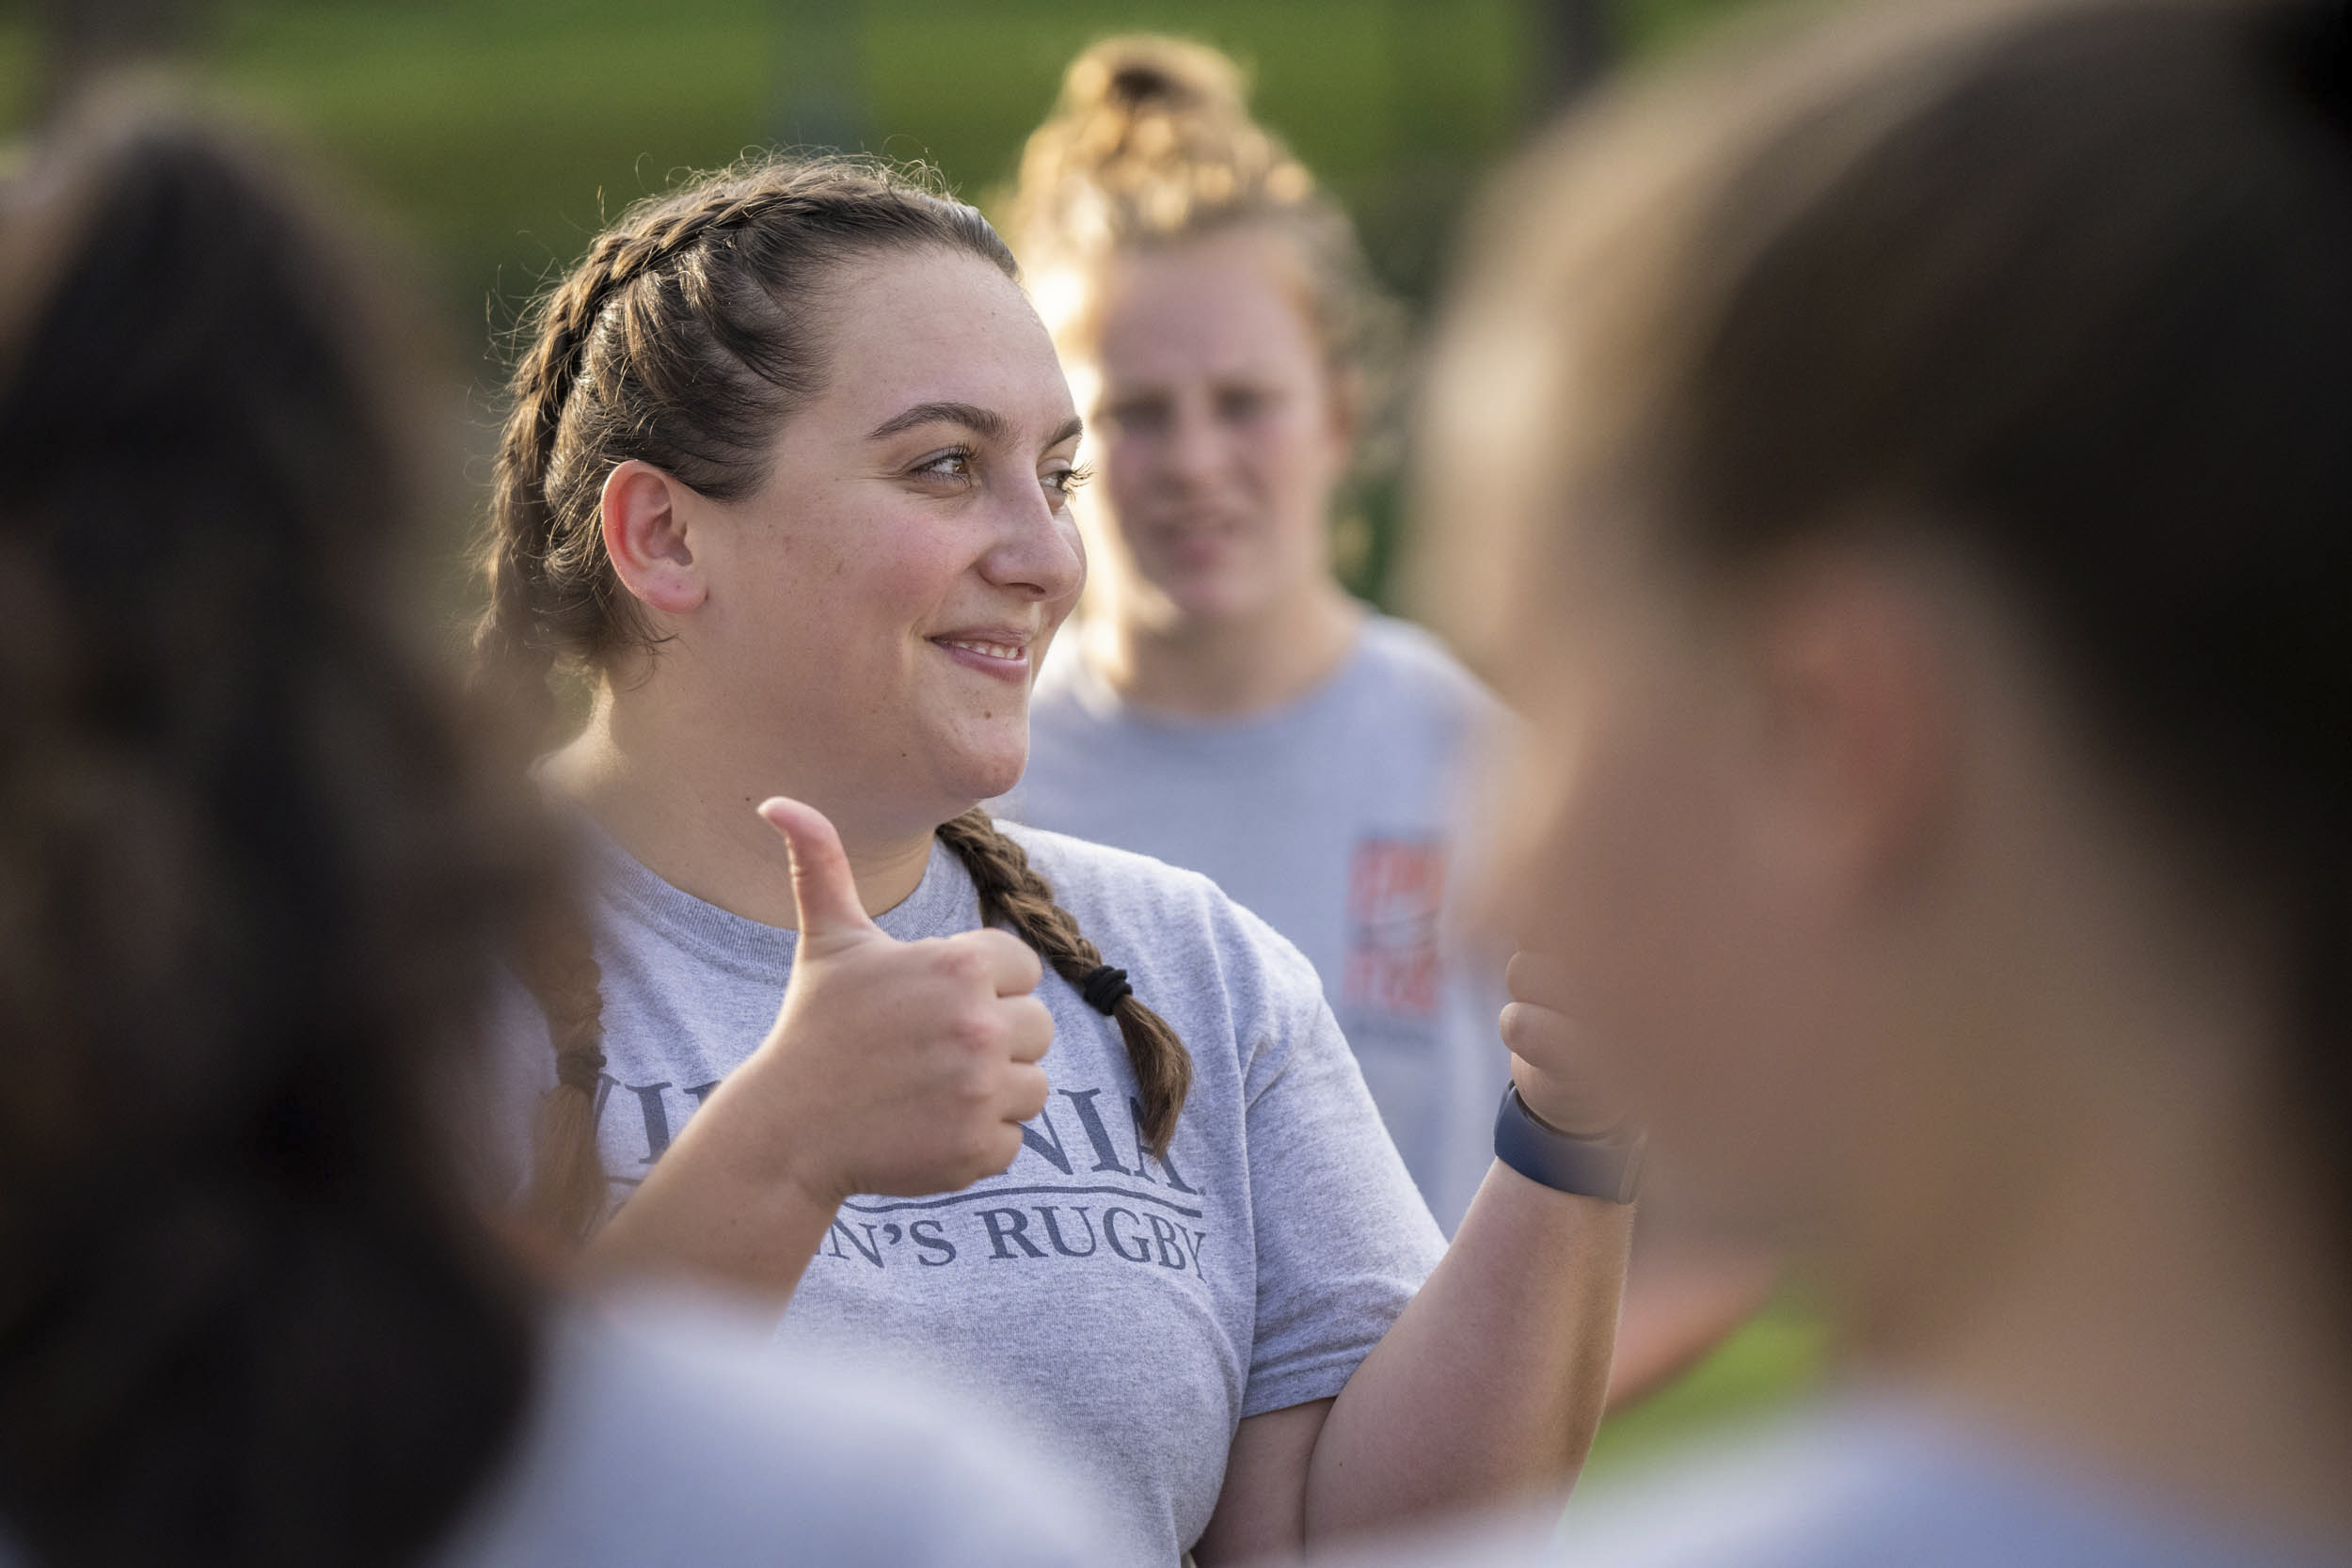 Woman on the Woman's Rugby team giving thumbs up to her teammates